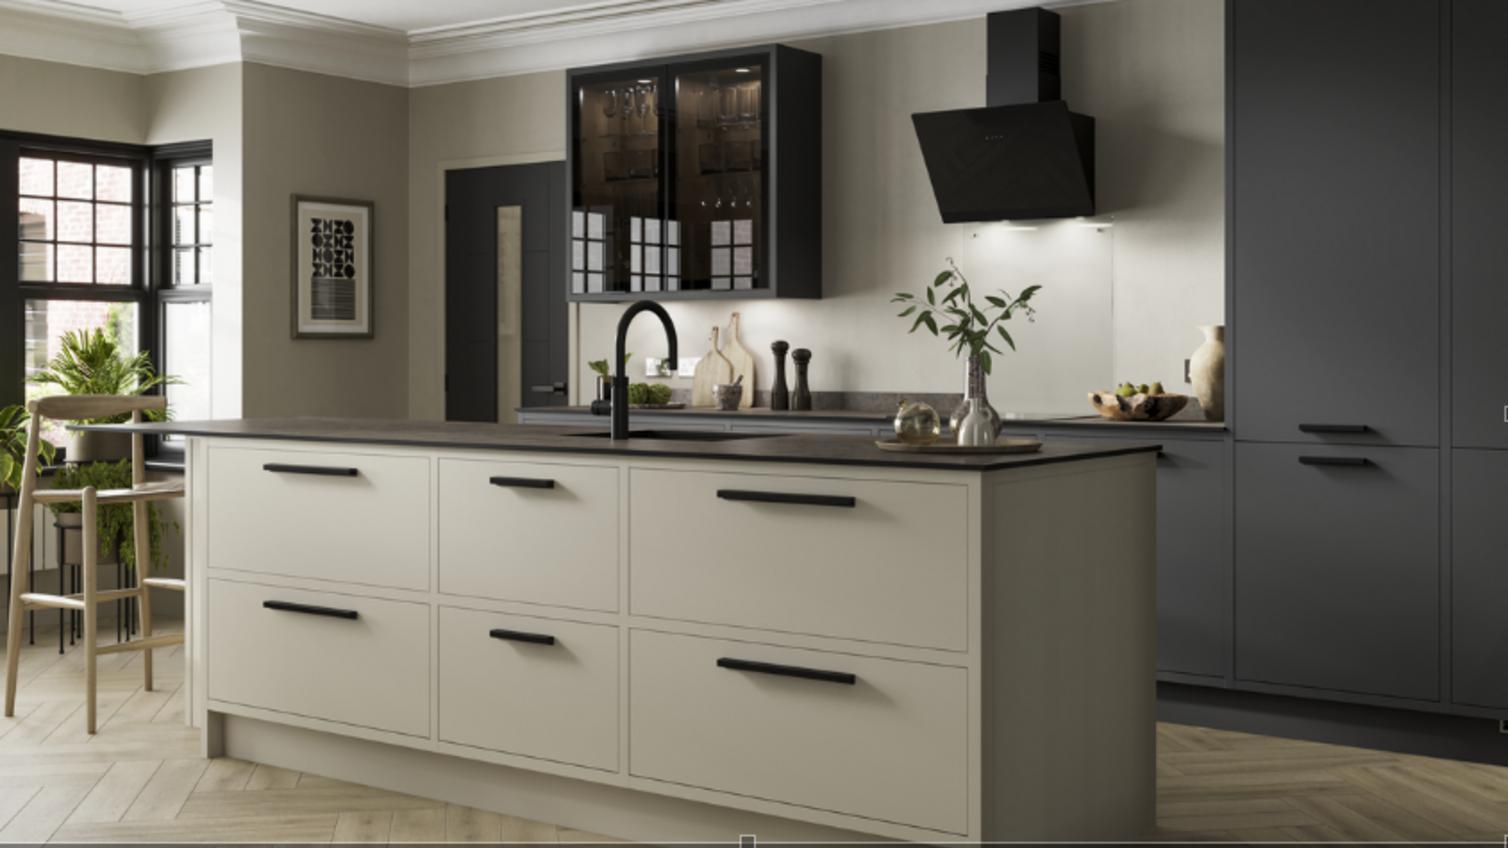 An in frame, slab kitchen, in a two tone scheme, and hues of black and cream.